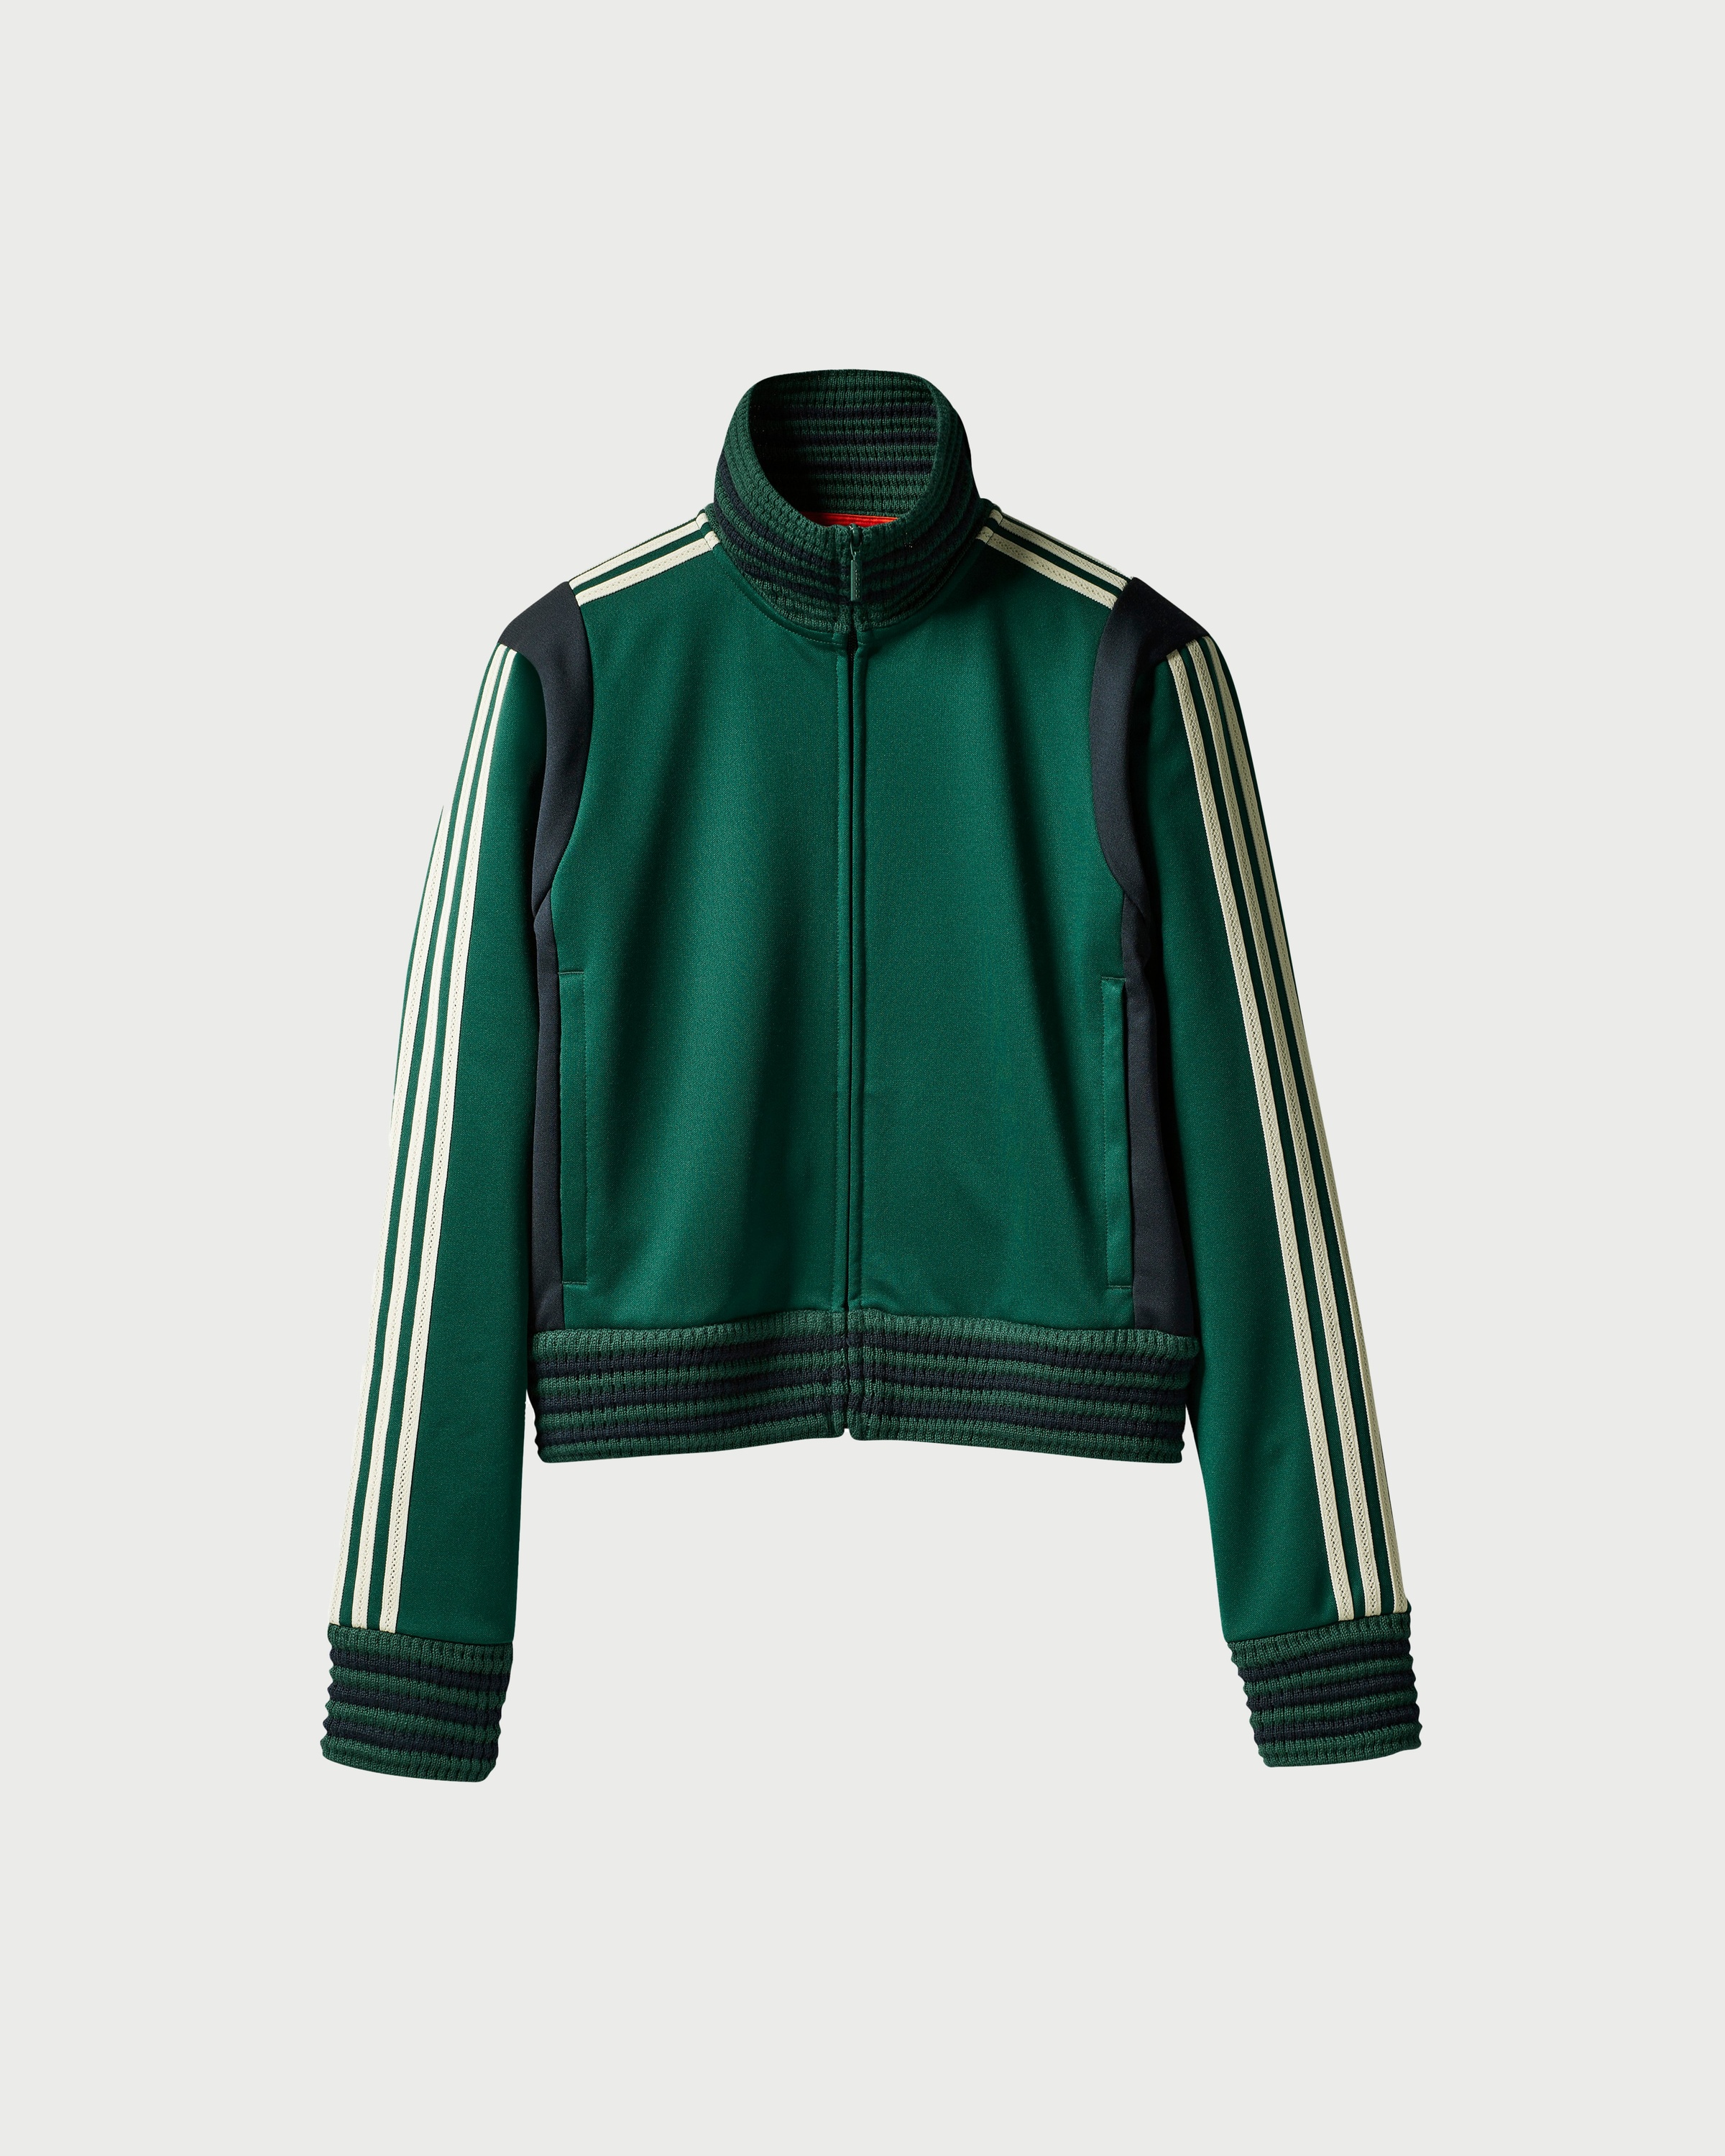 Adidas x Wales Bonner – Lovers Track Top Green - Track Jackets - Green - Image 1